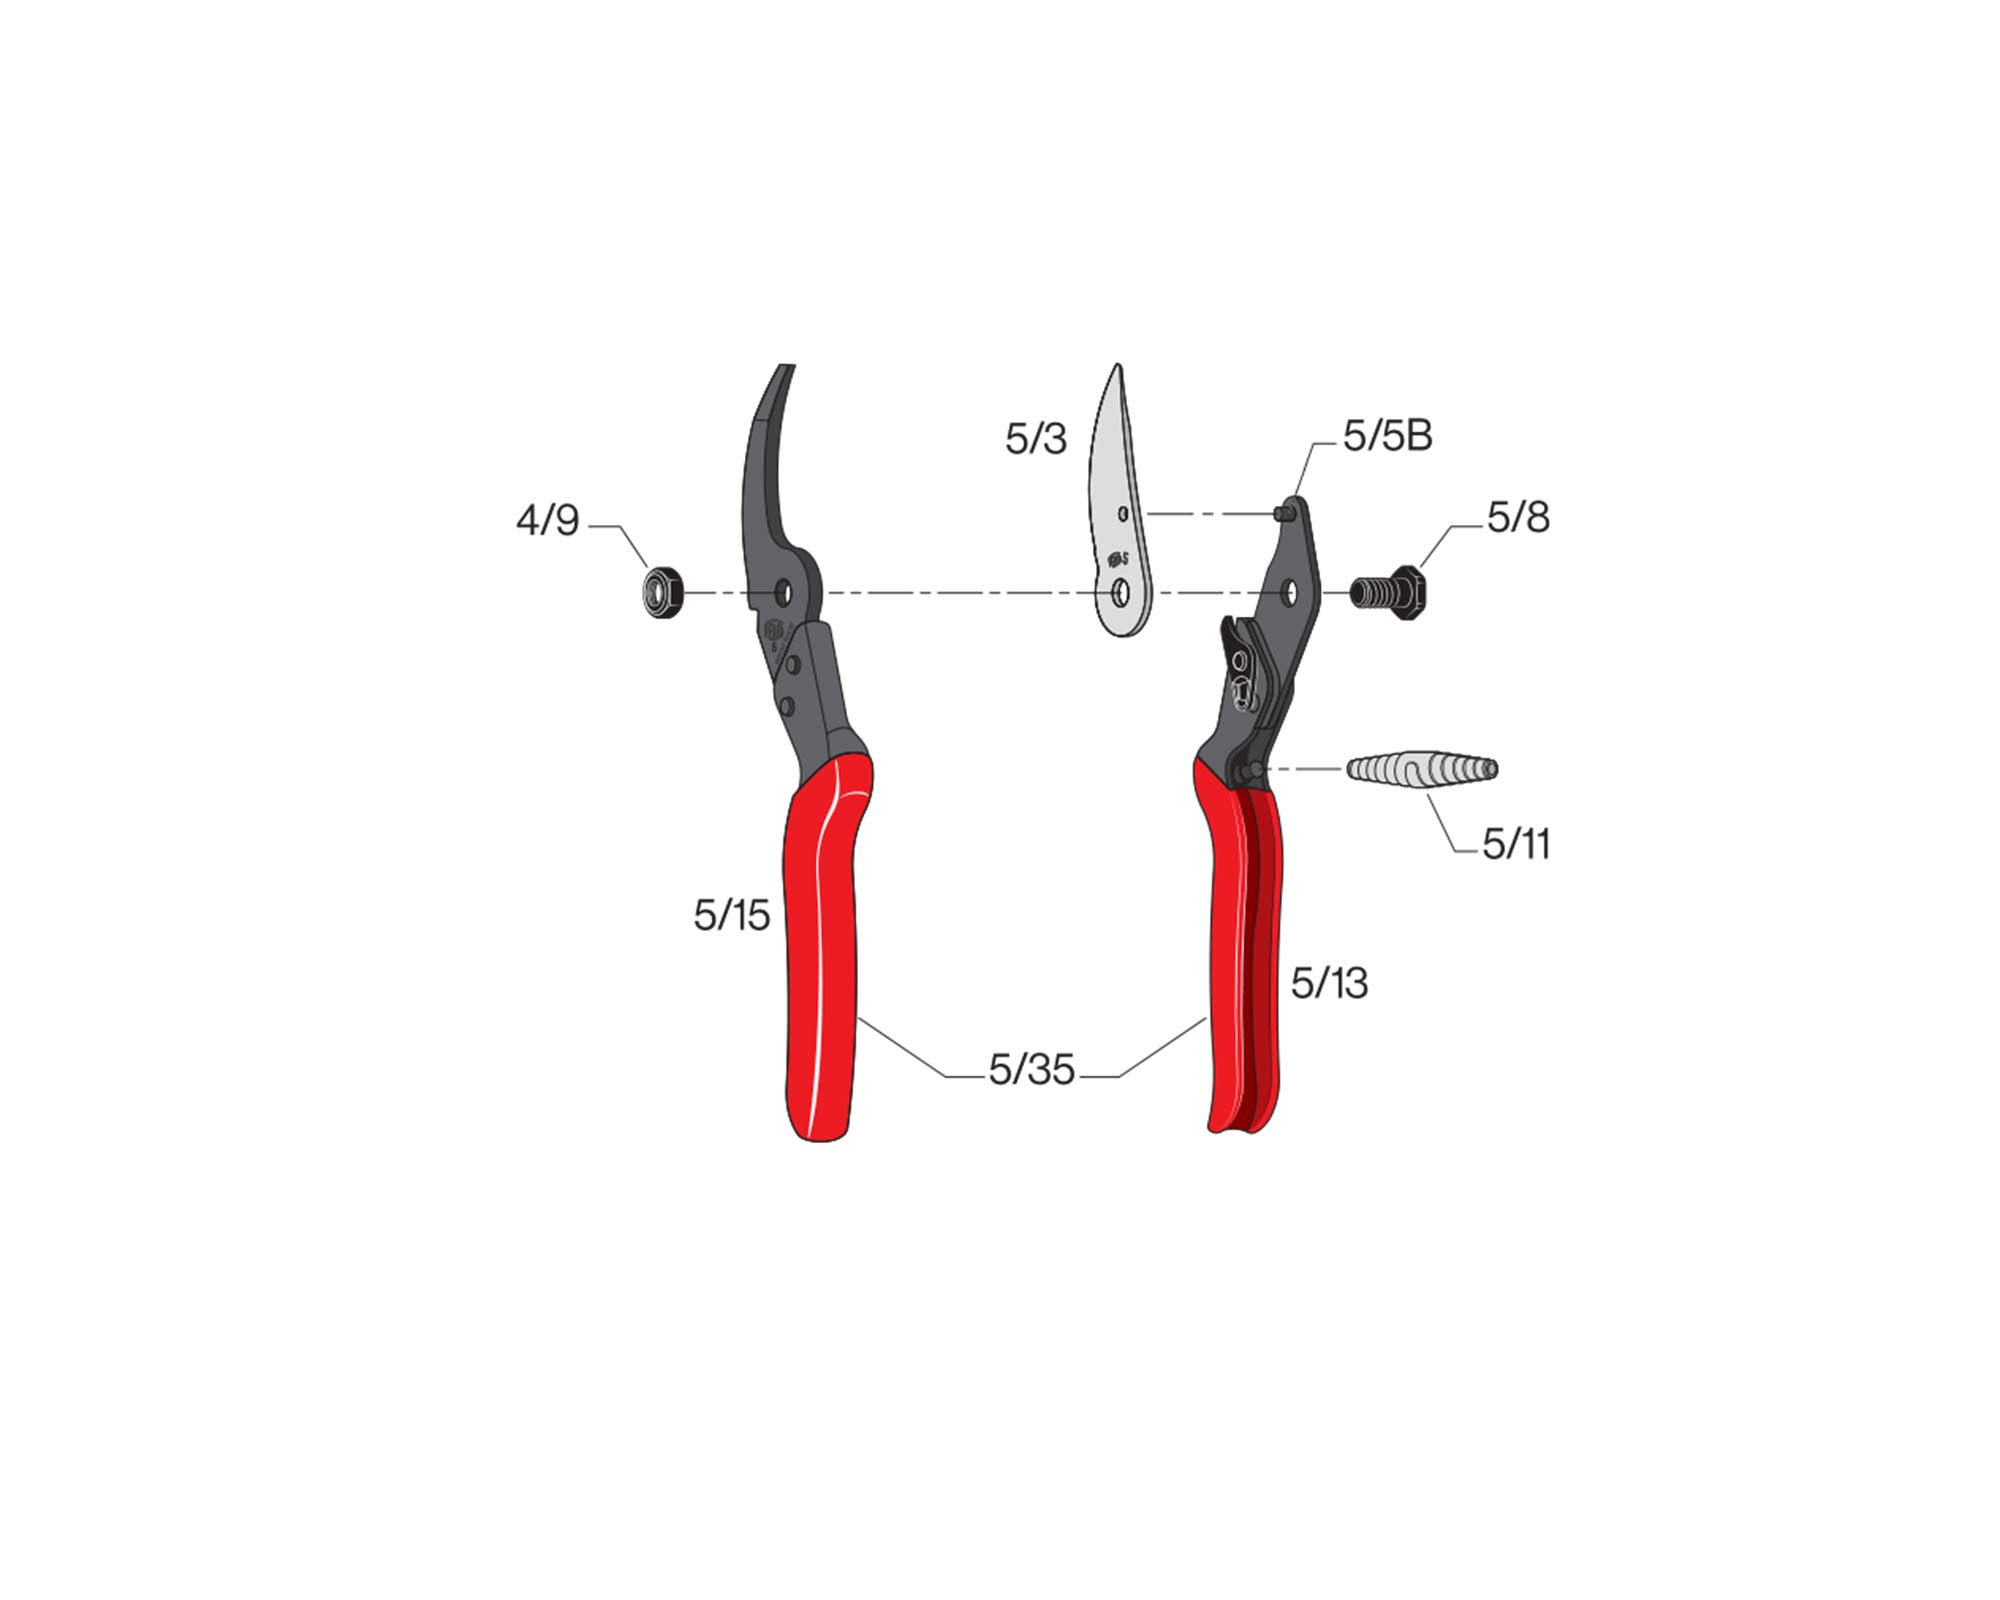 Diagram of Felco5 showing the part in question - the spare blade 5/3.